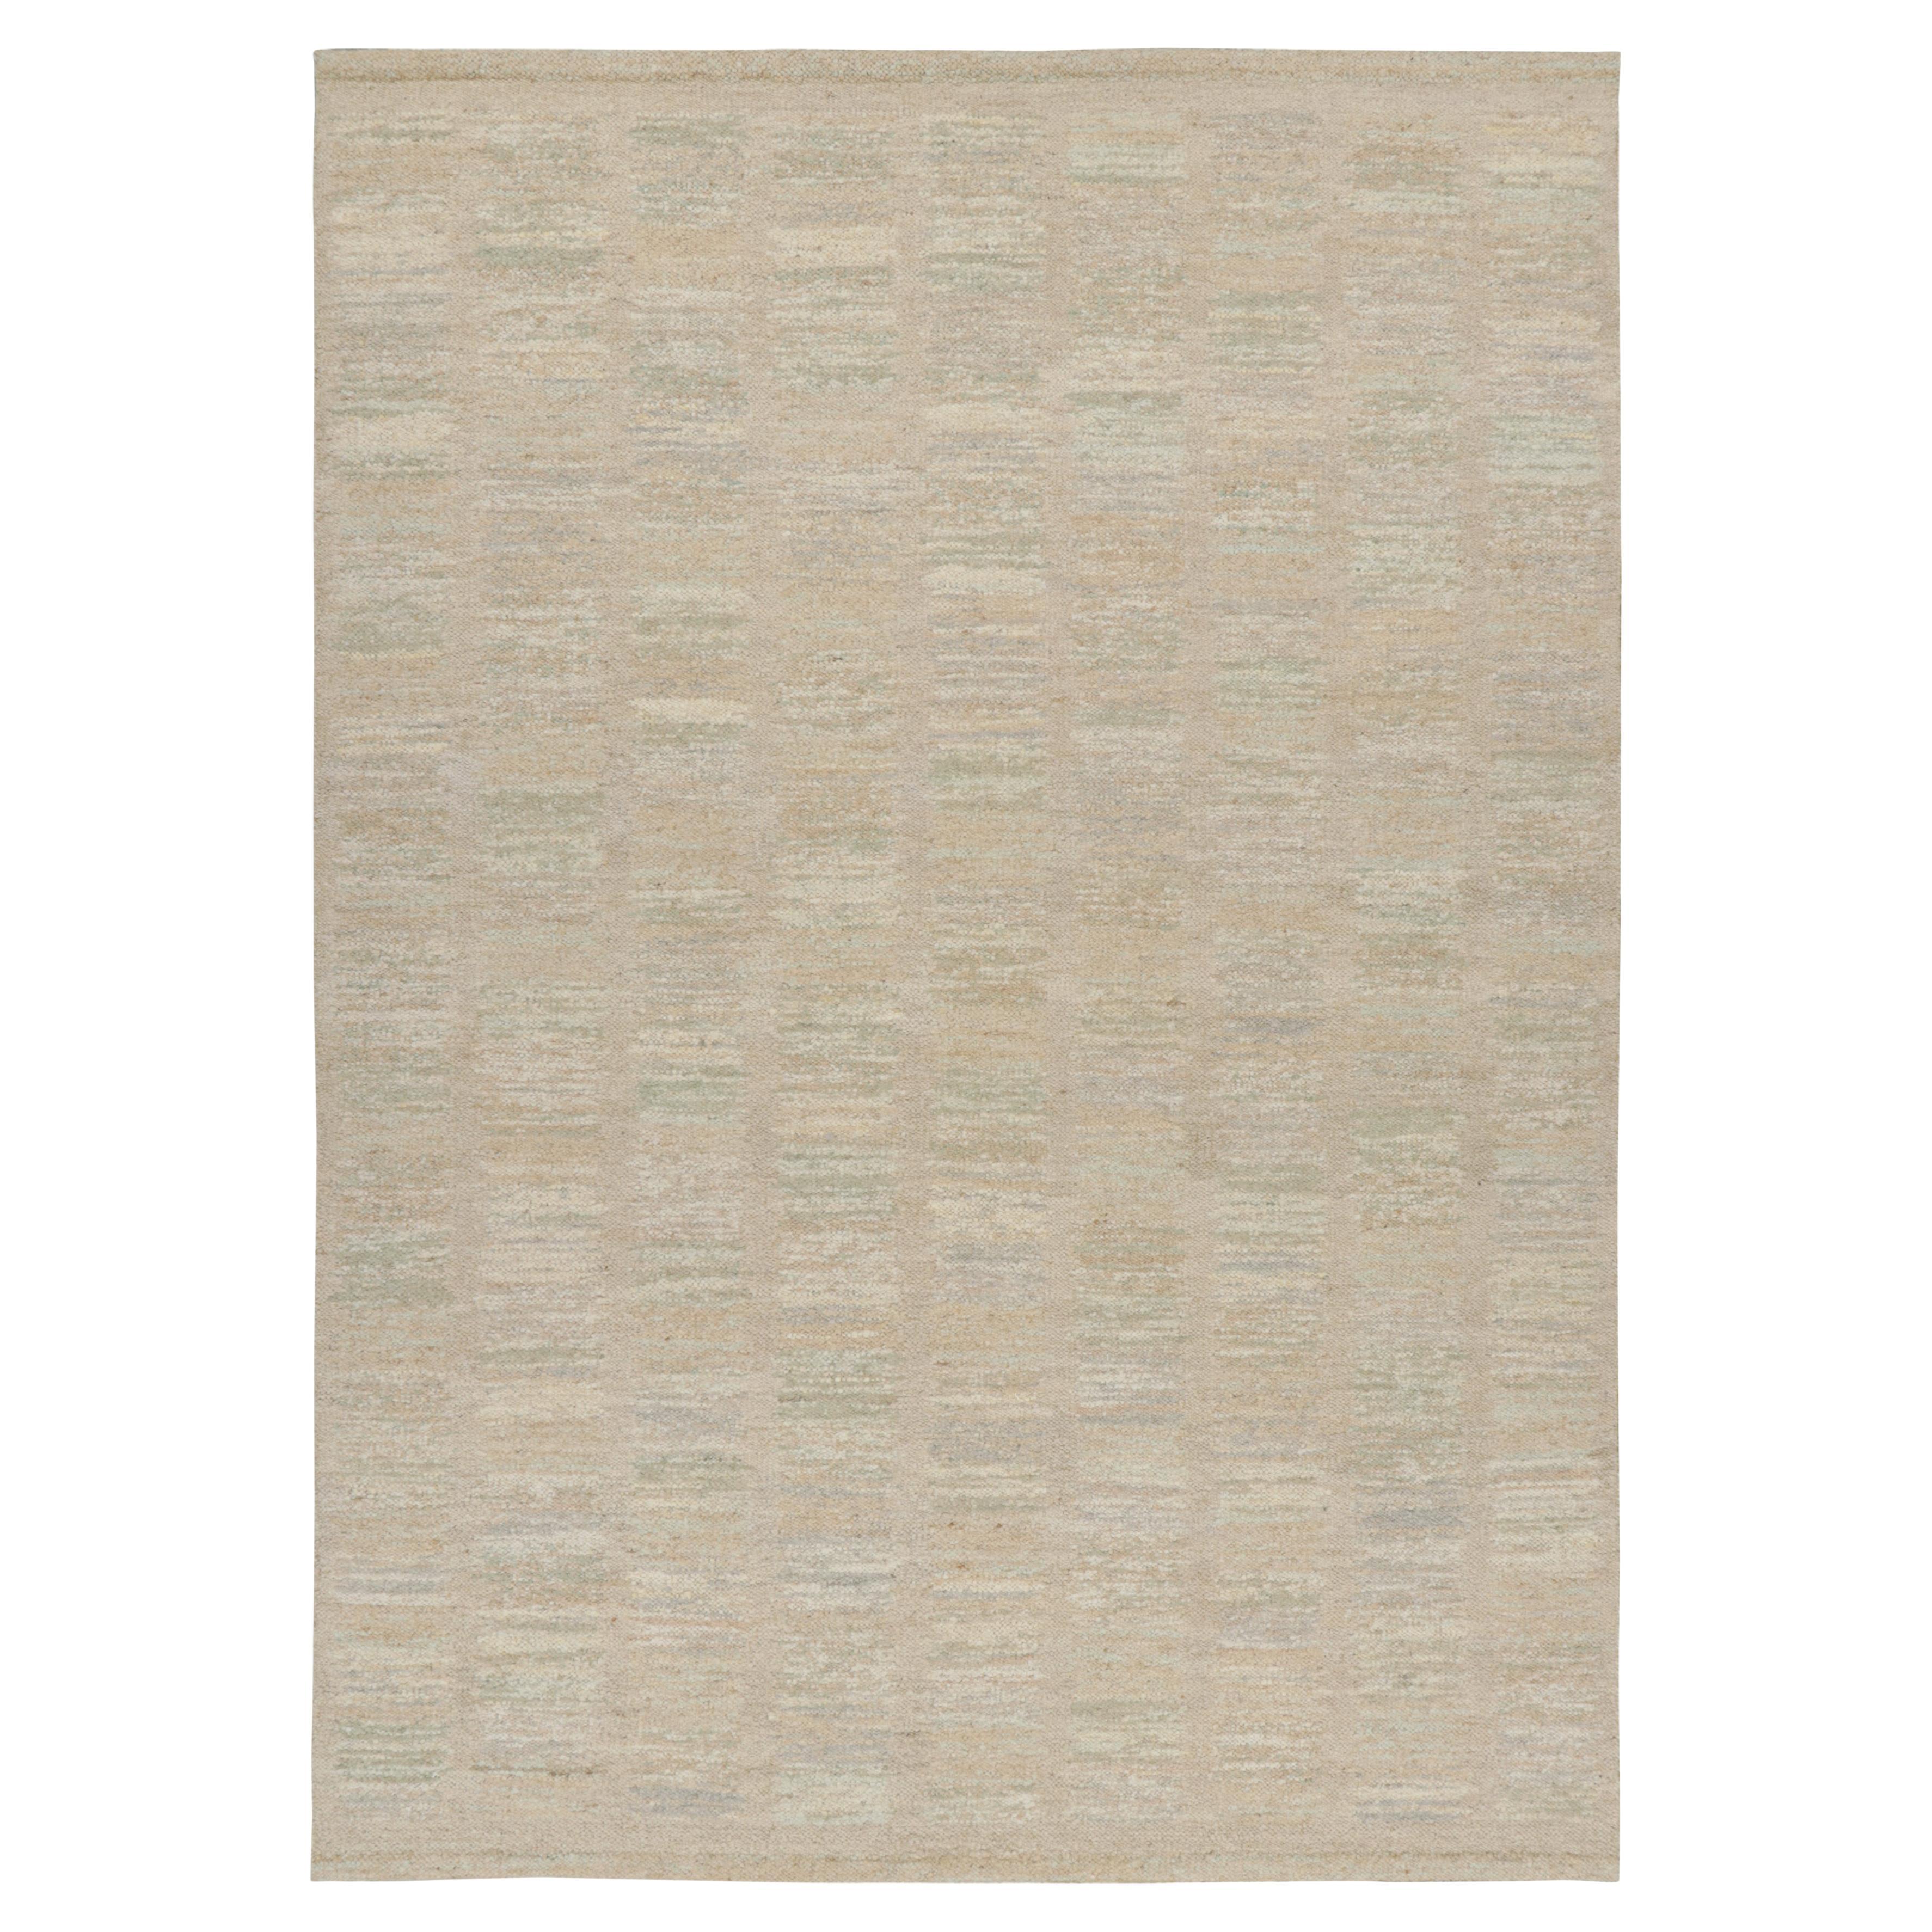 Rug & Kilim’s Scandinavian Style Rug in Beige, with Colorful Geometric Patterns